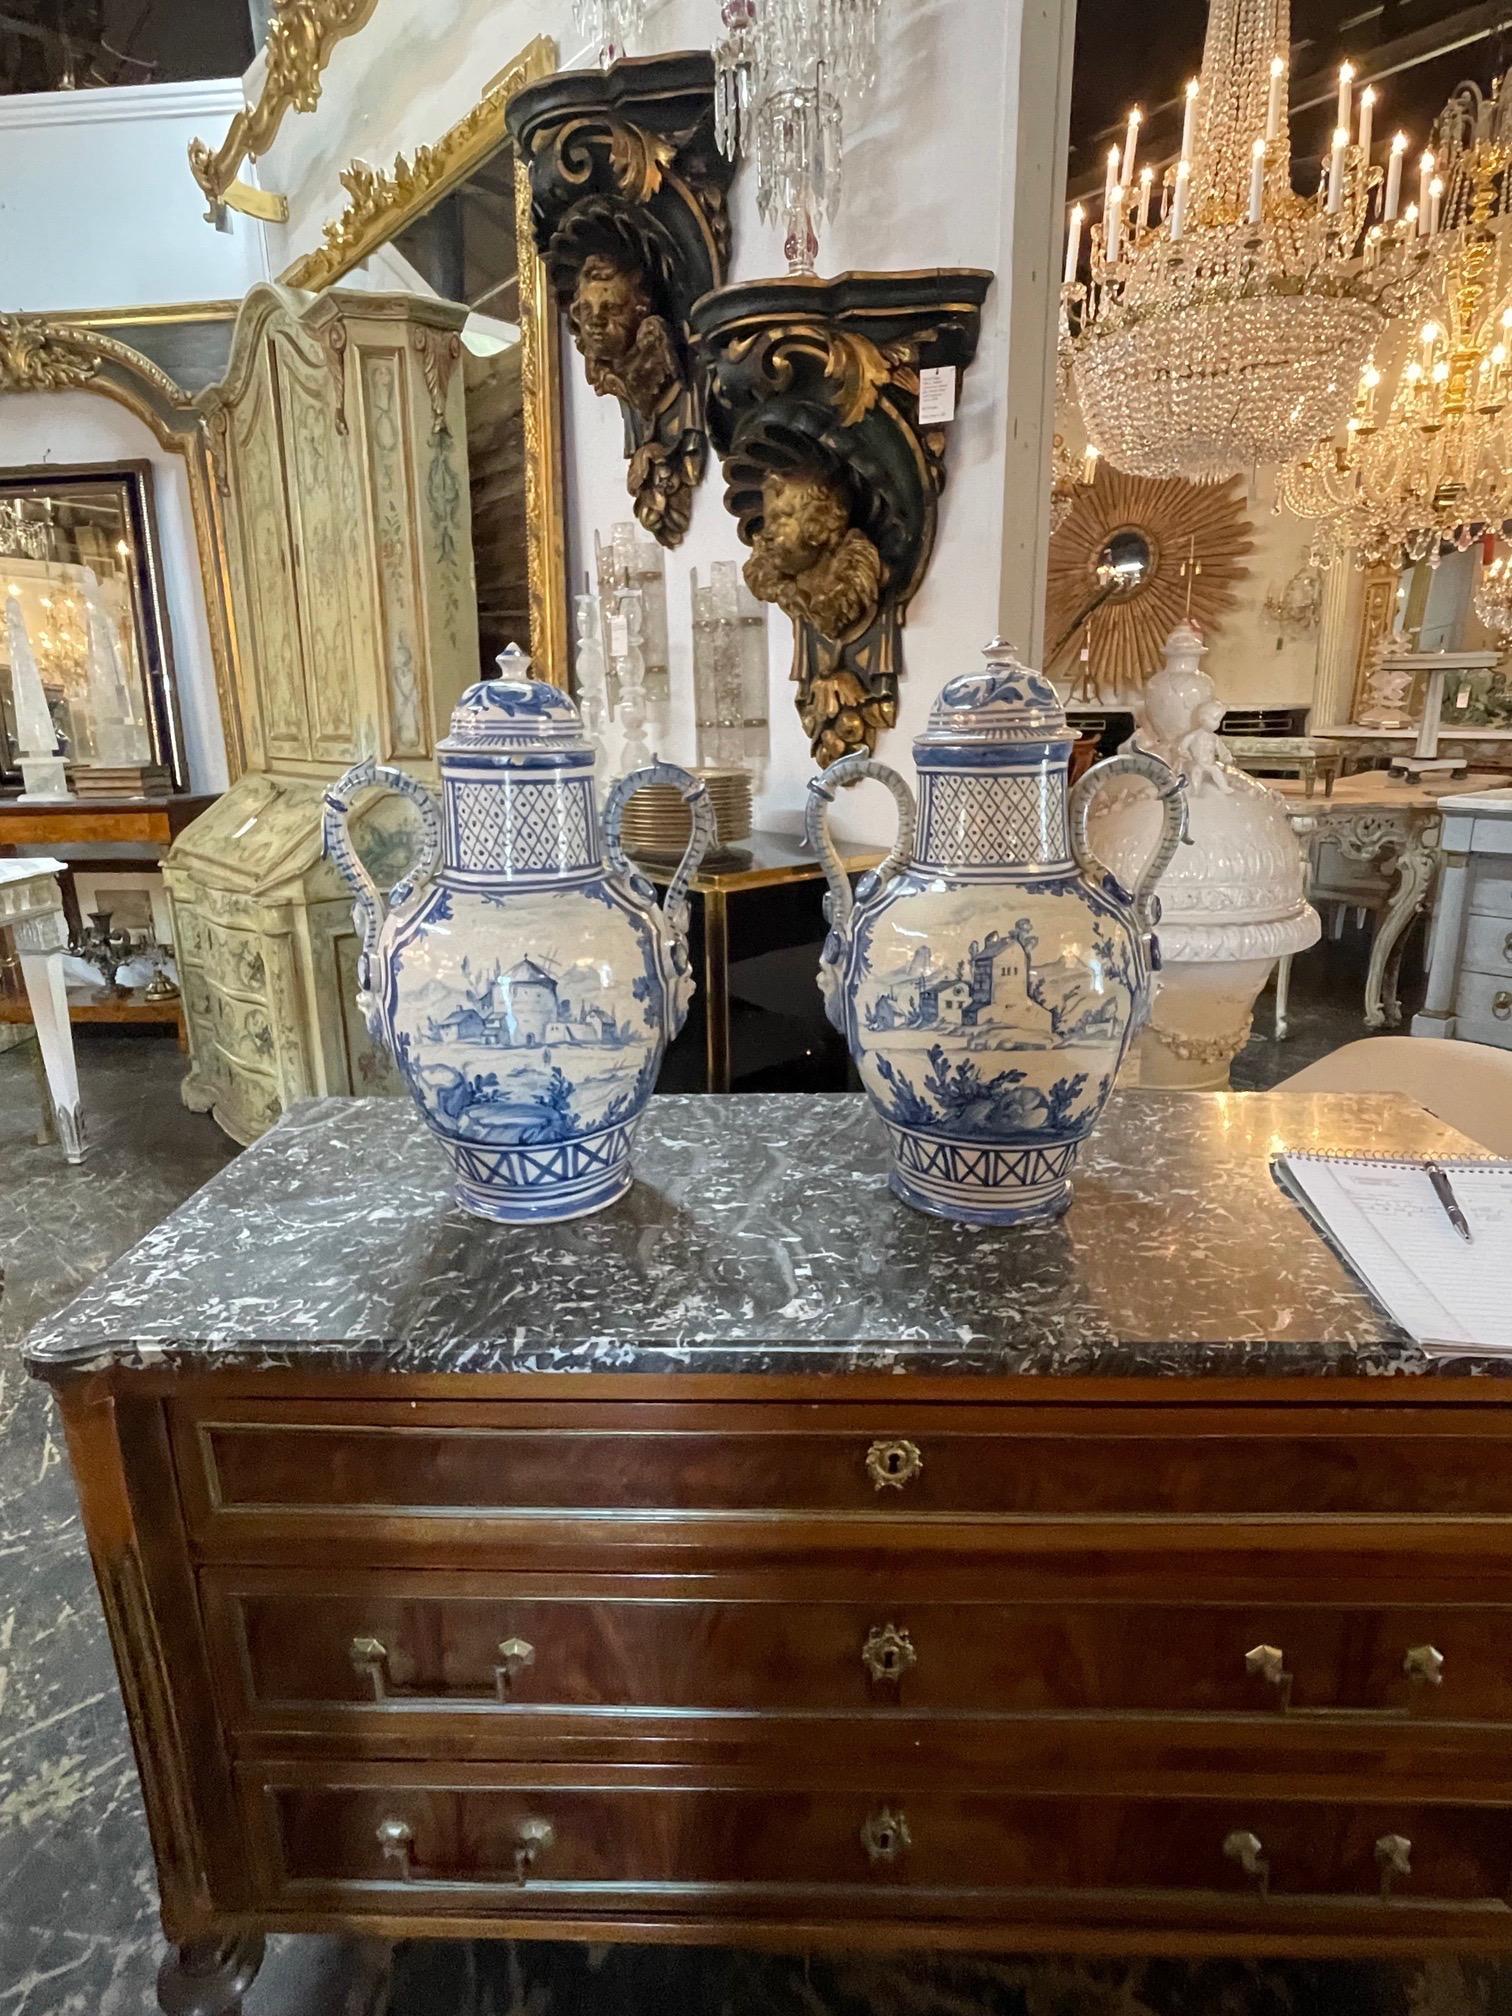 Gorgeous pair of antique blue and white vases. Interesting decorative designs. Makes a fabulous accessory!